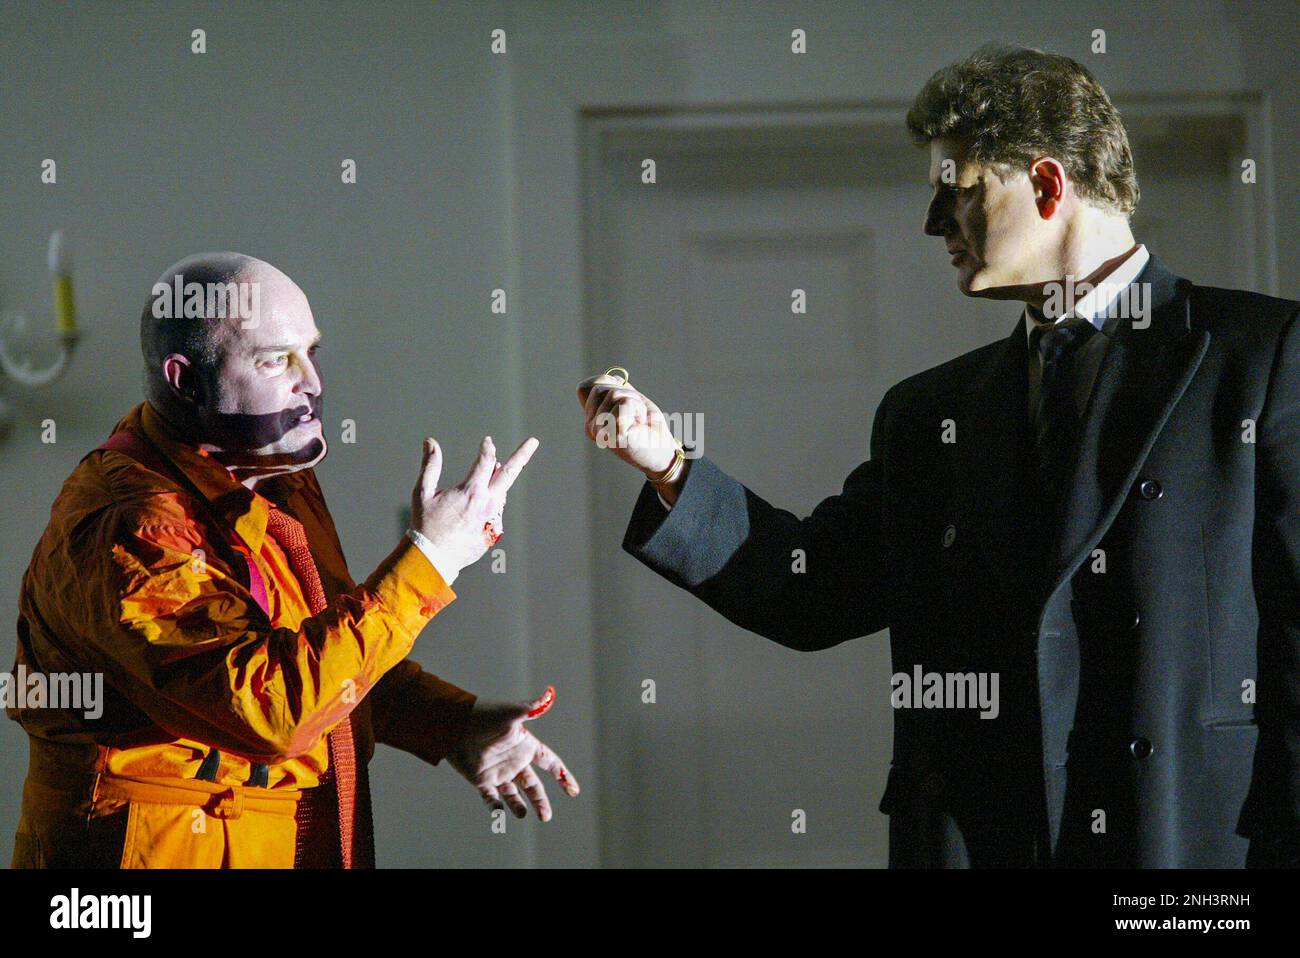 l-r: Andrew Shore (Alberich), Robert Hayward (Wotan) with the Ring in THE RHINEGOLD by Wagner at English National Opera (ENO), London Coliseum, London WC2  27/02/2004  conductor: Paul Daniel  design: Richard Hudson  lighting: Simon Mills  choreographer: Claire Gaskin  director: Phyllida Lloyd Stock Photo